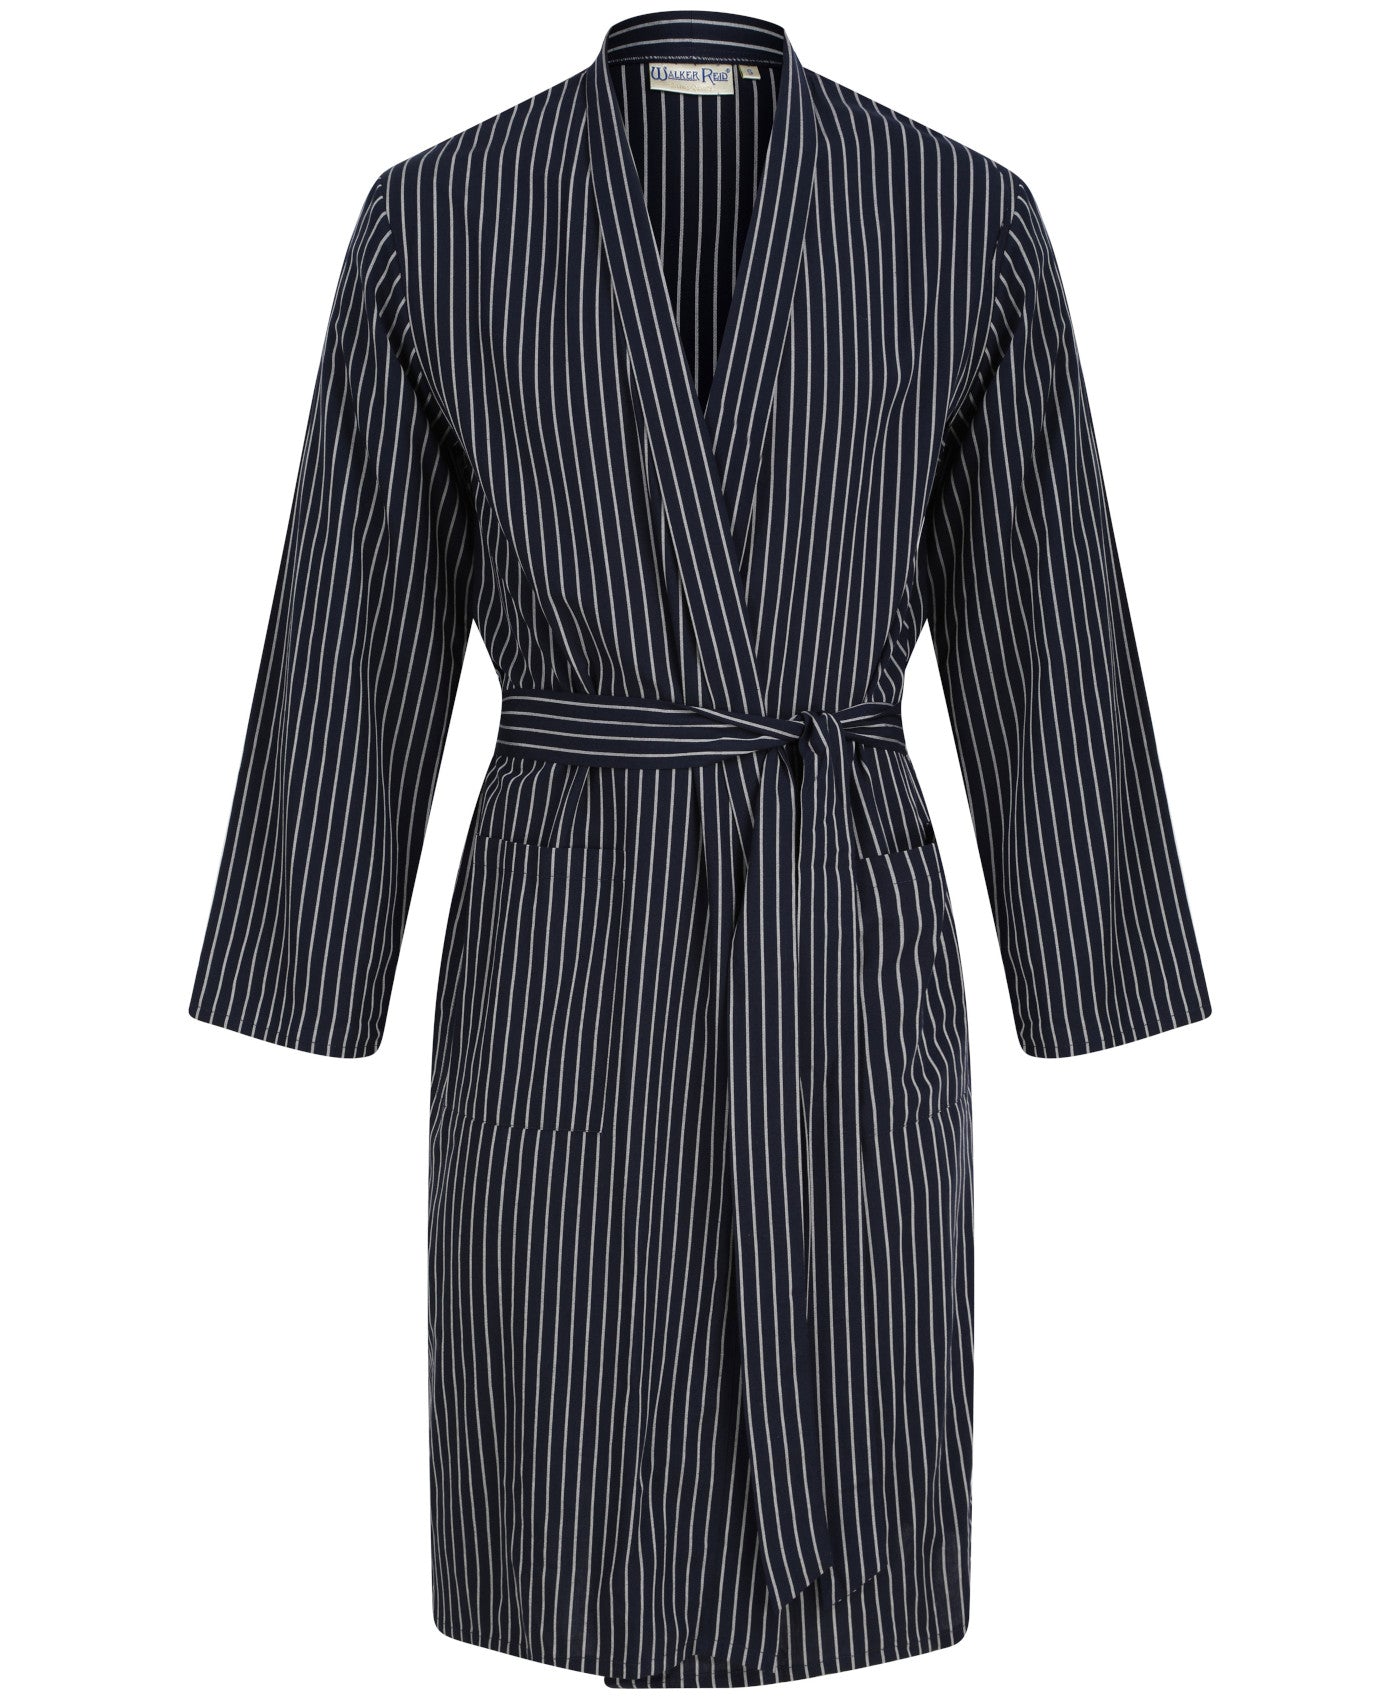 Mens Contare Grey Blue Stripe Cotton Light Weight Dressing Gown Robe